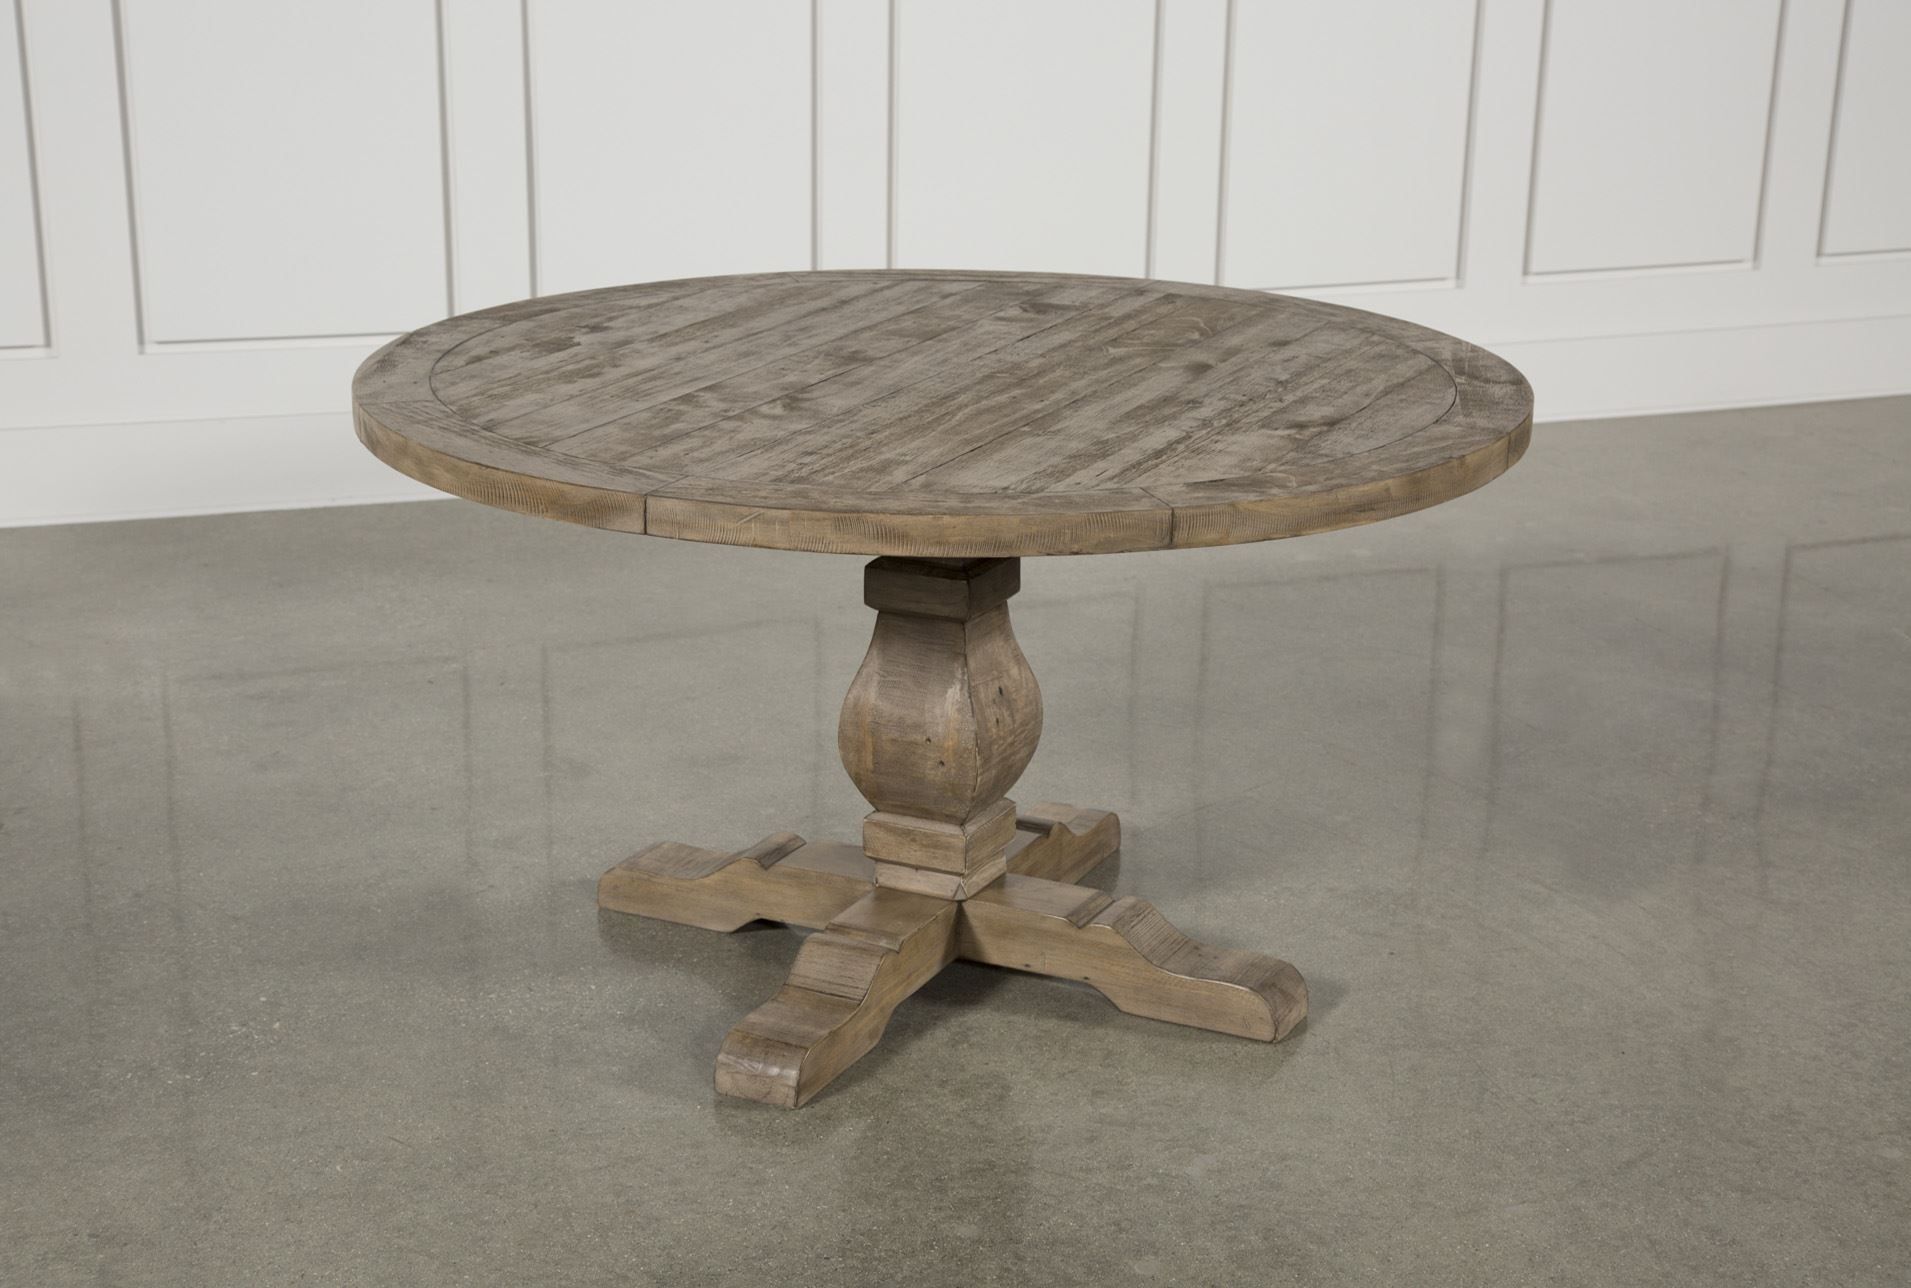 23 Lovely Kosas Dining Table – Welovedandelion Intended For Recent Caden Rectangle Dining Tables (View 12 of 20)